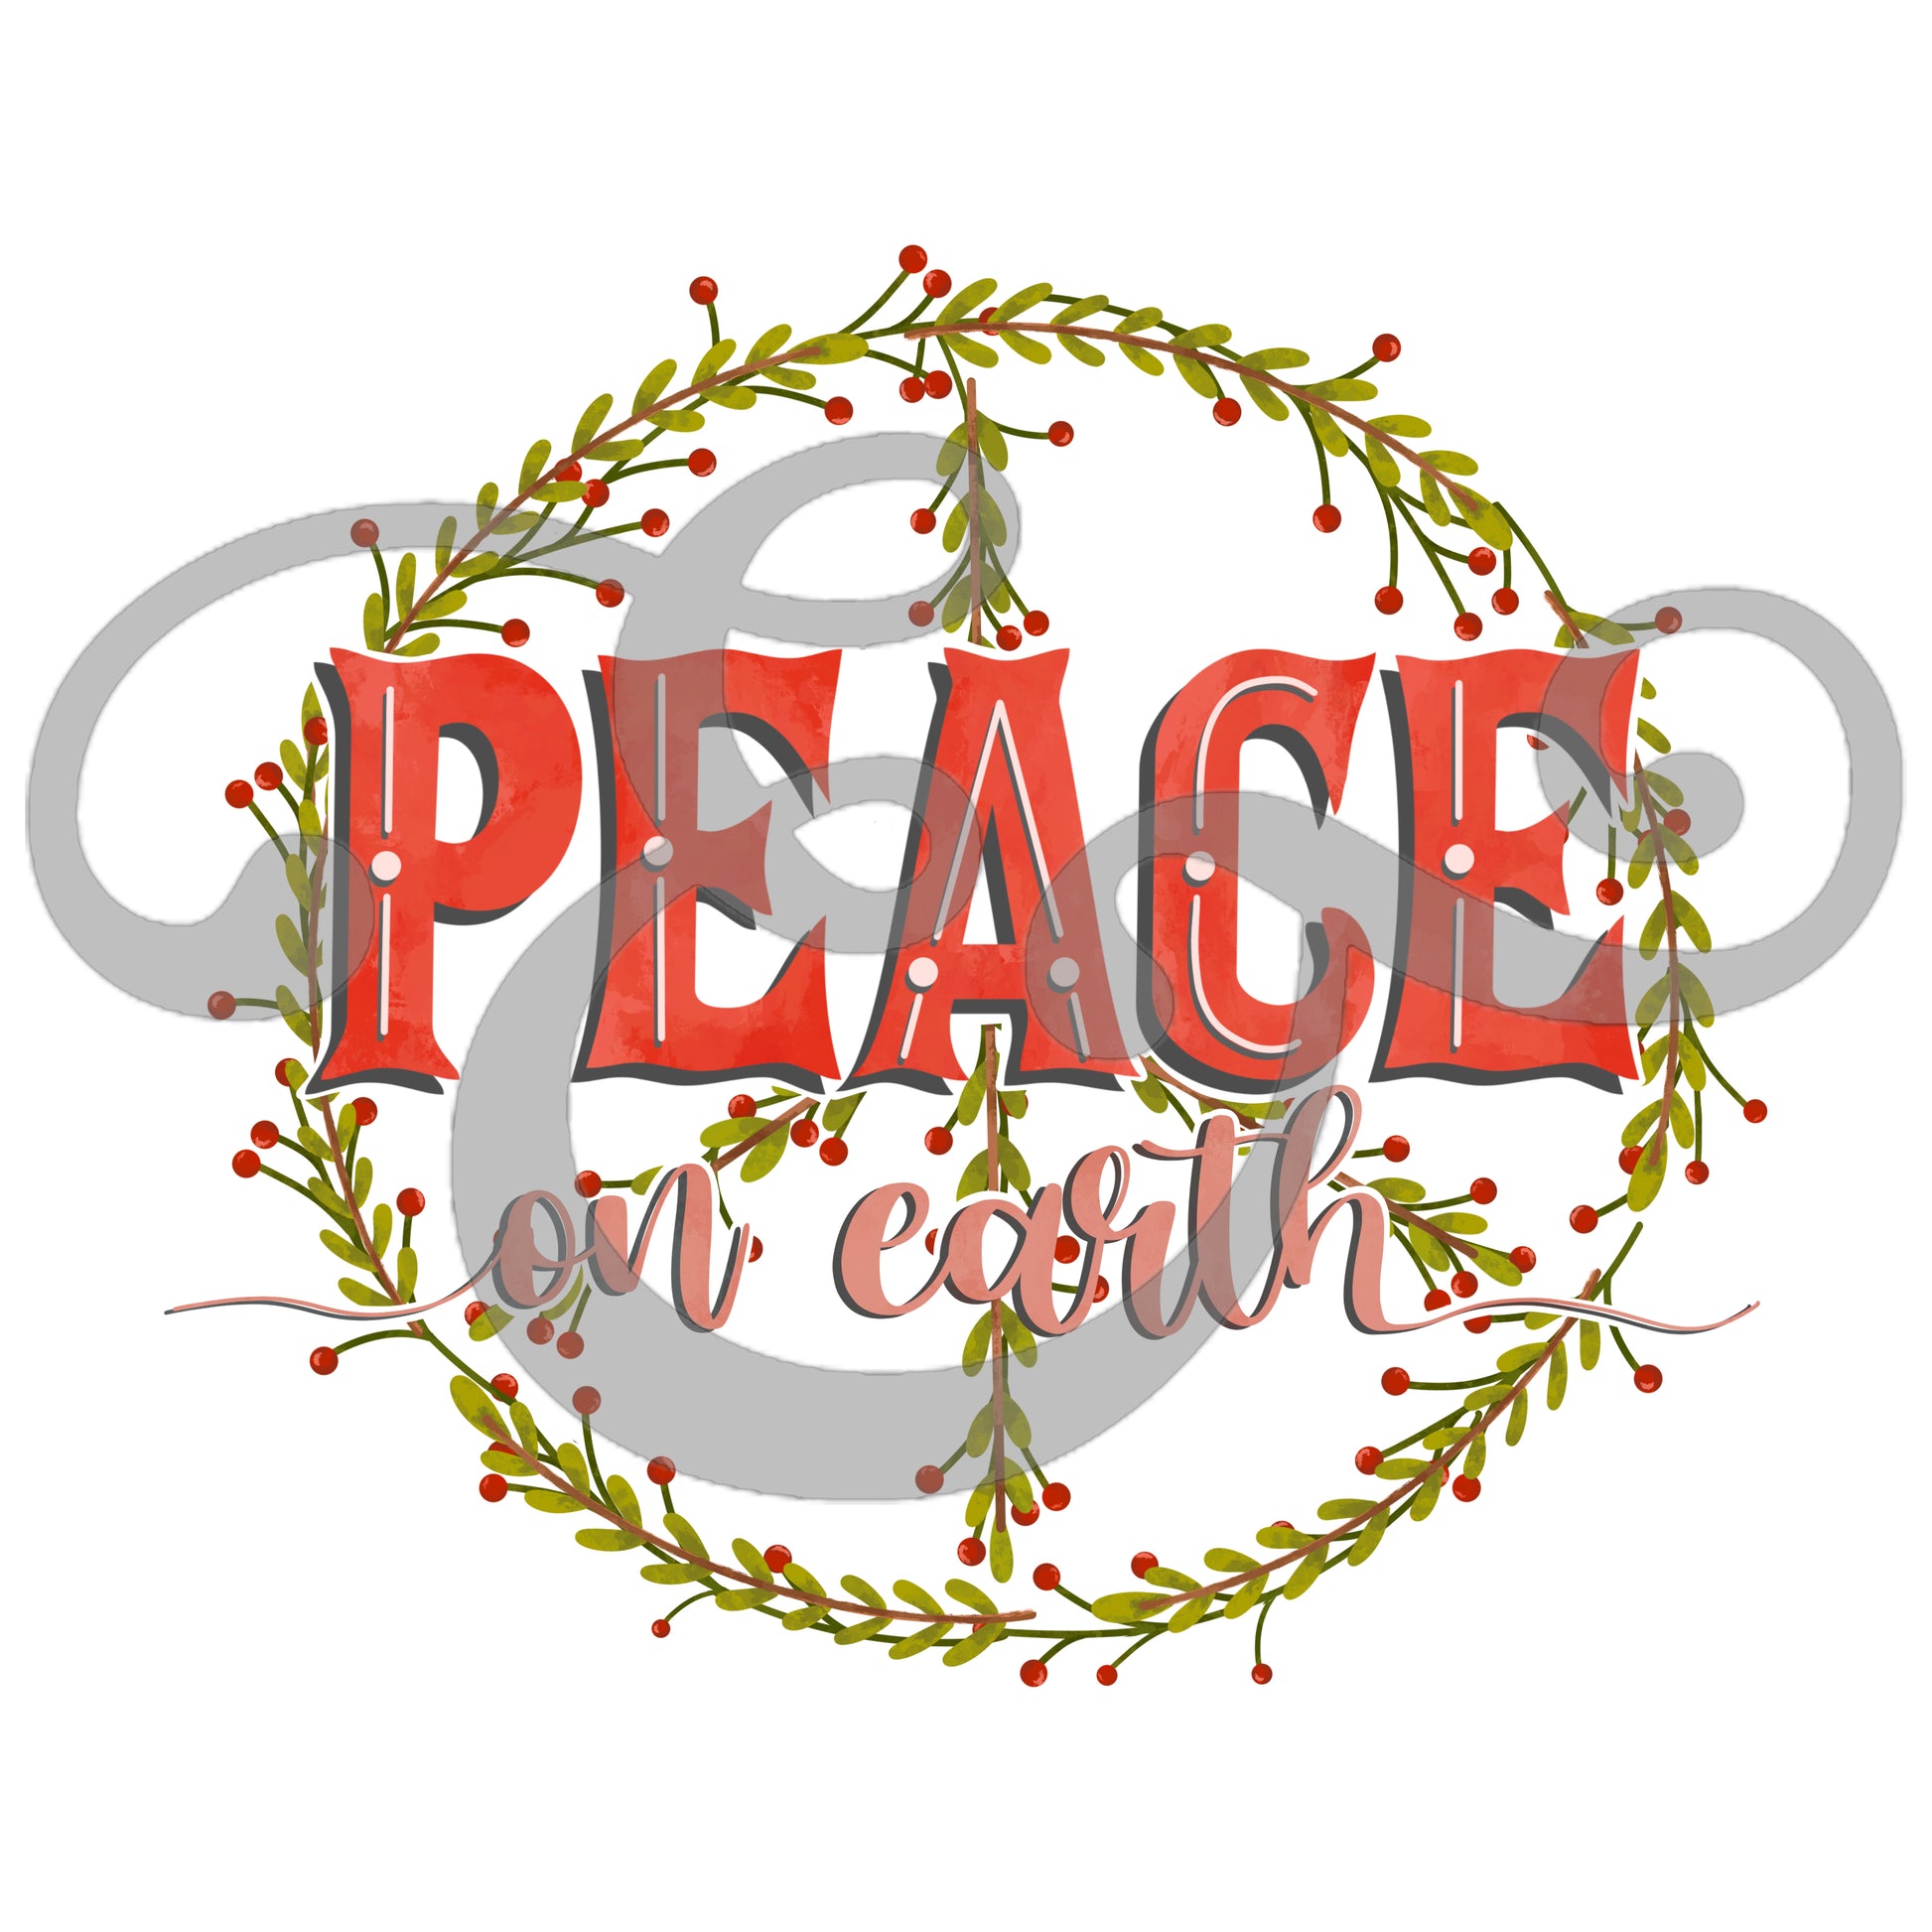 Peace On Earth Sublimation Transfer (6643311706190)